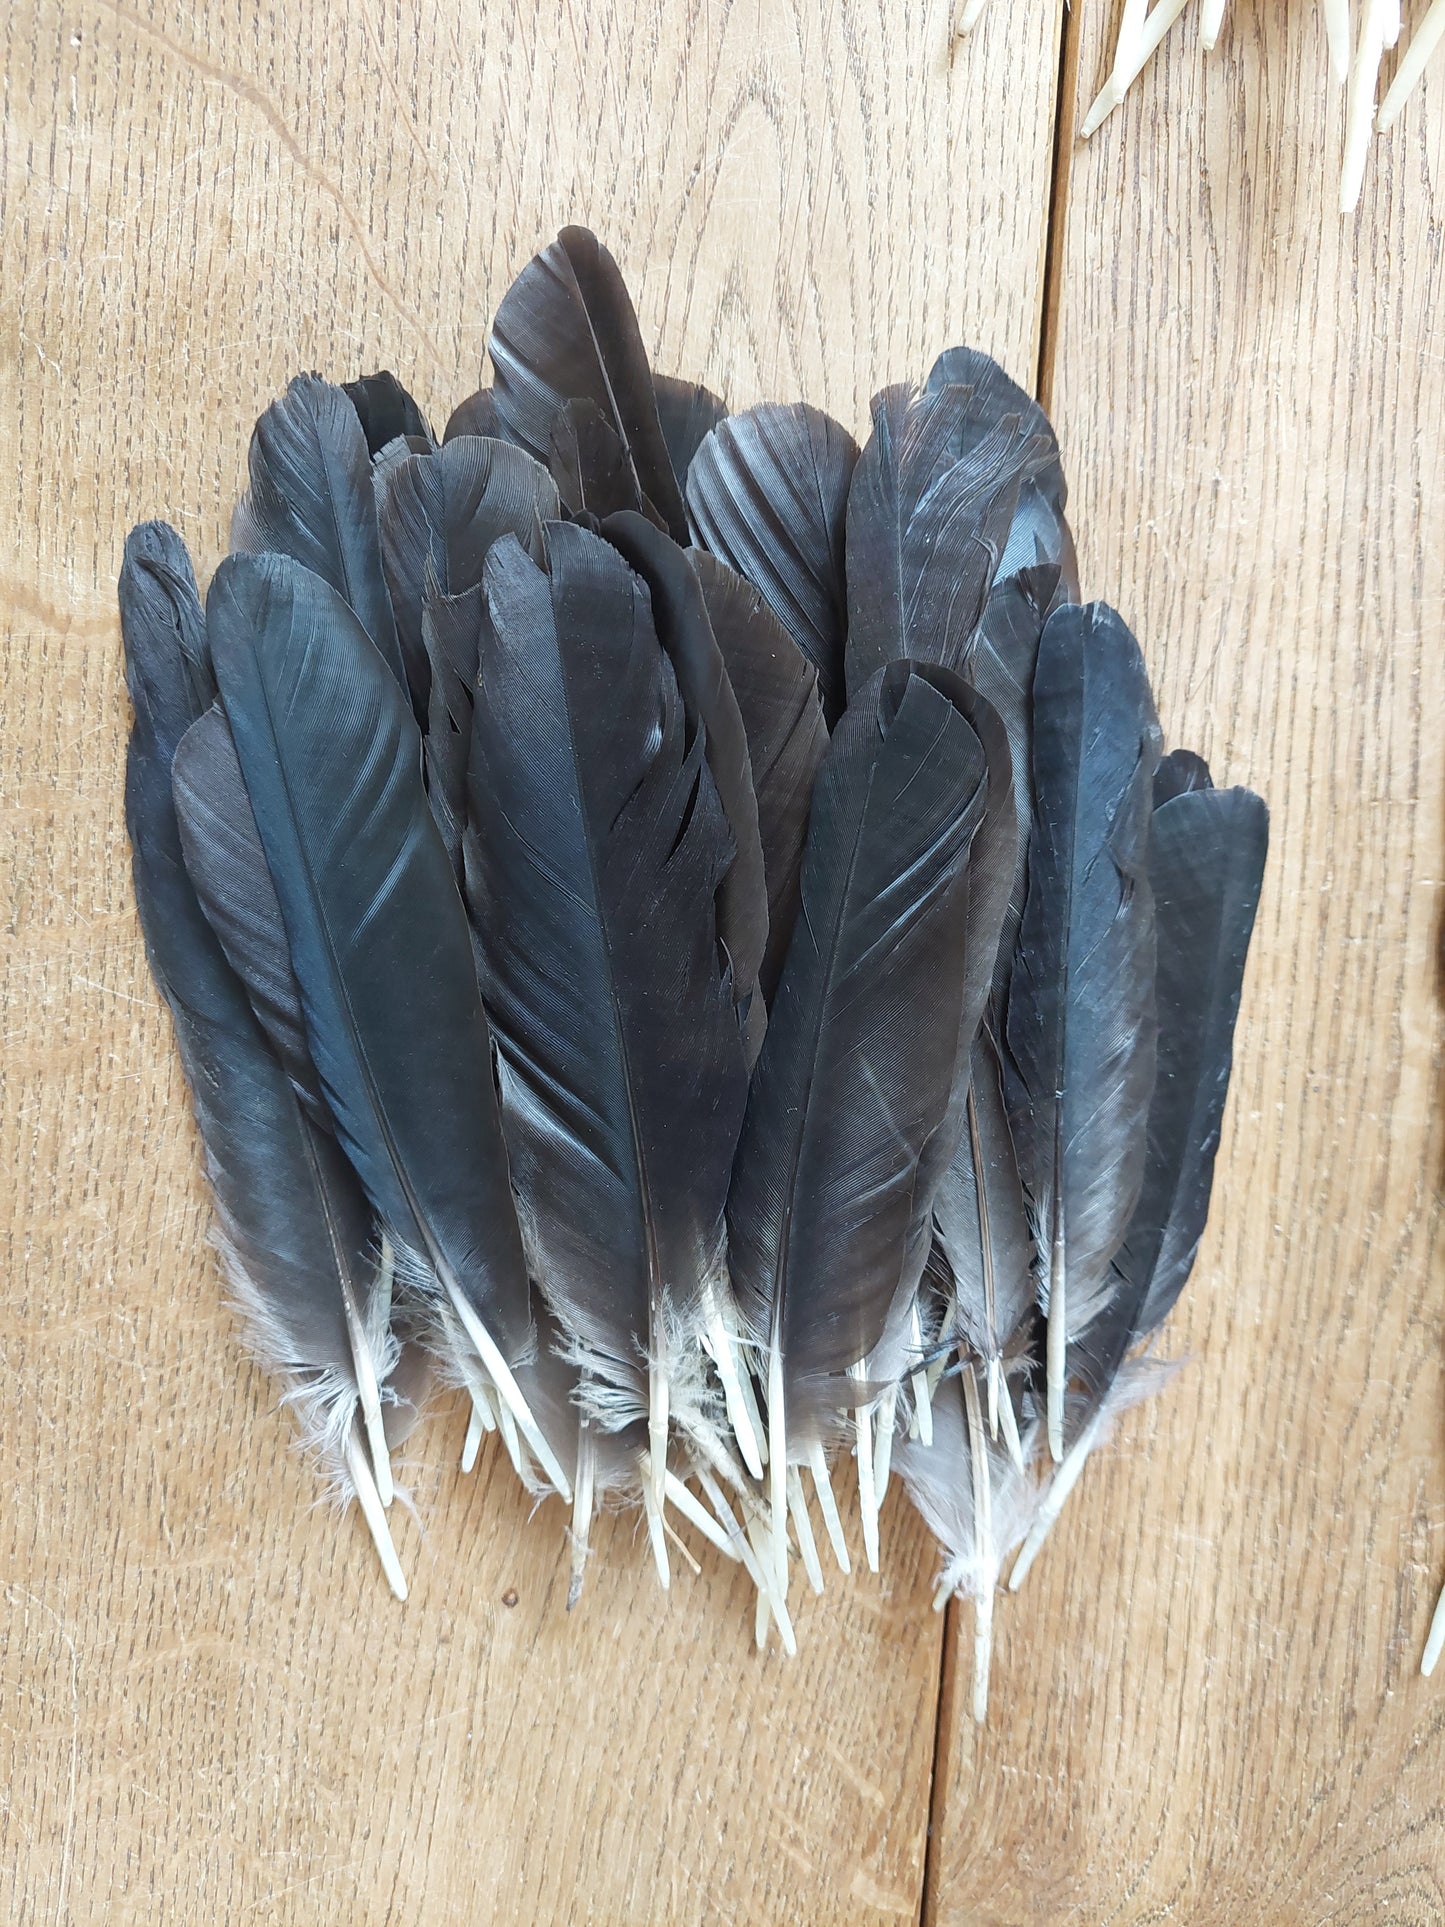 Crow feathers